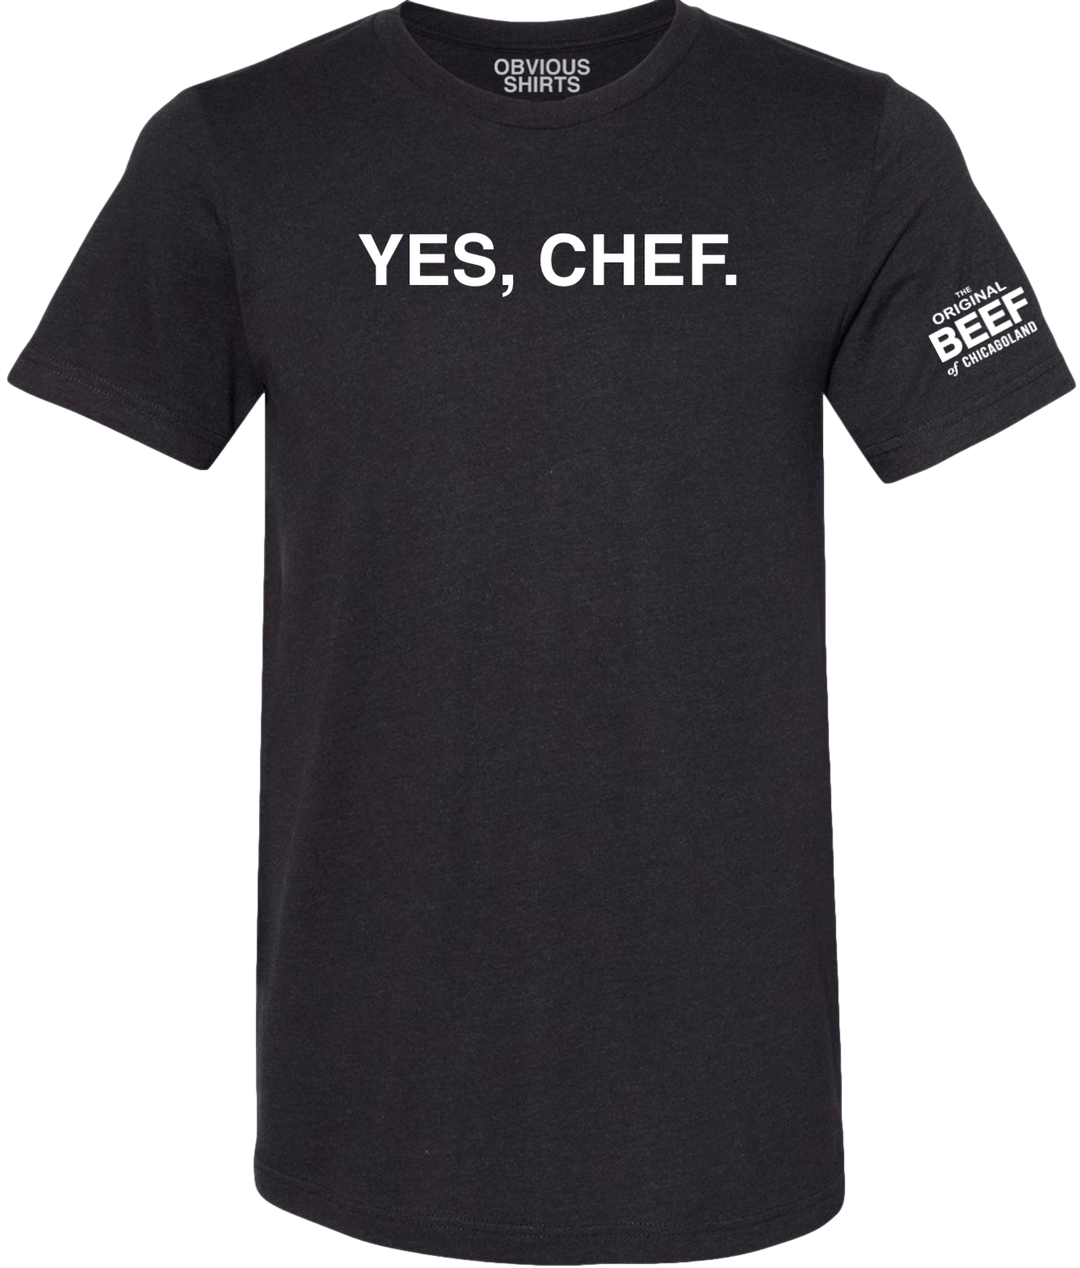 YES, CHEF. - OBVIOUS SHIRTS